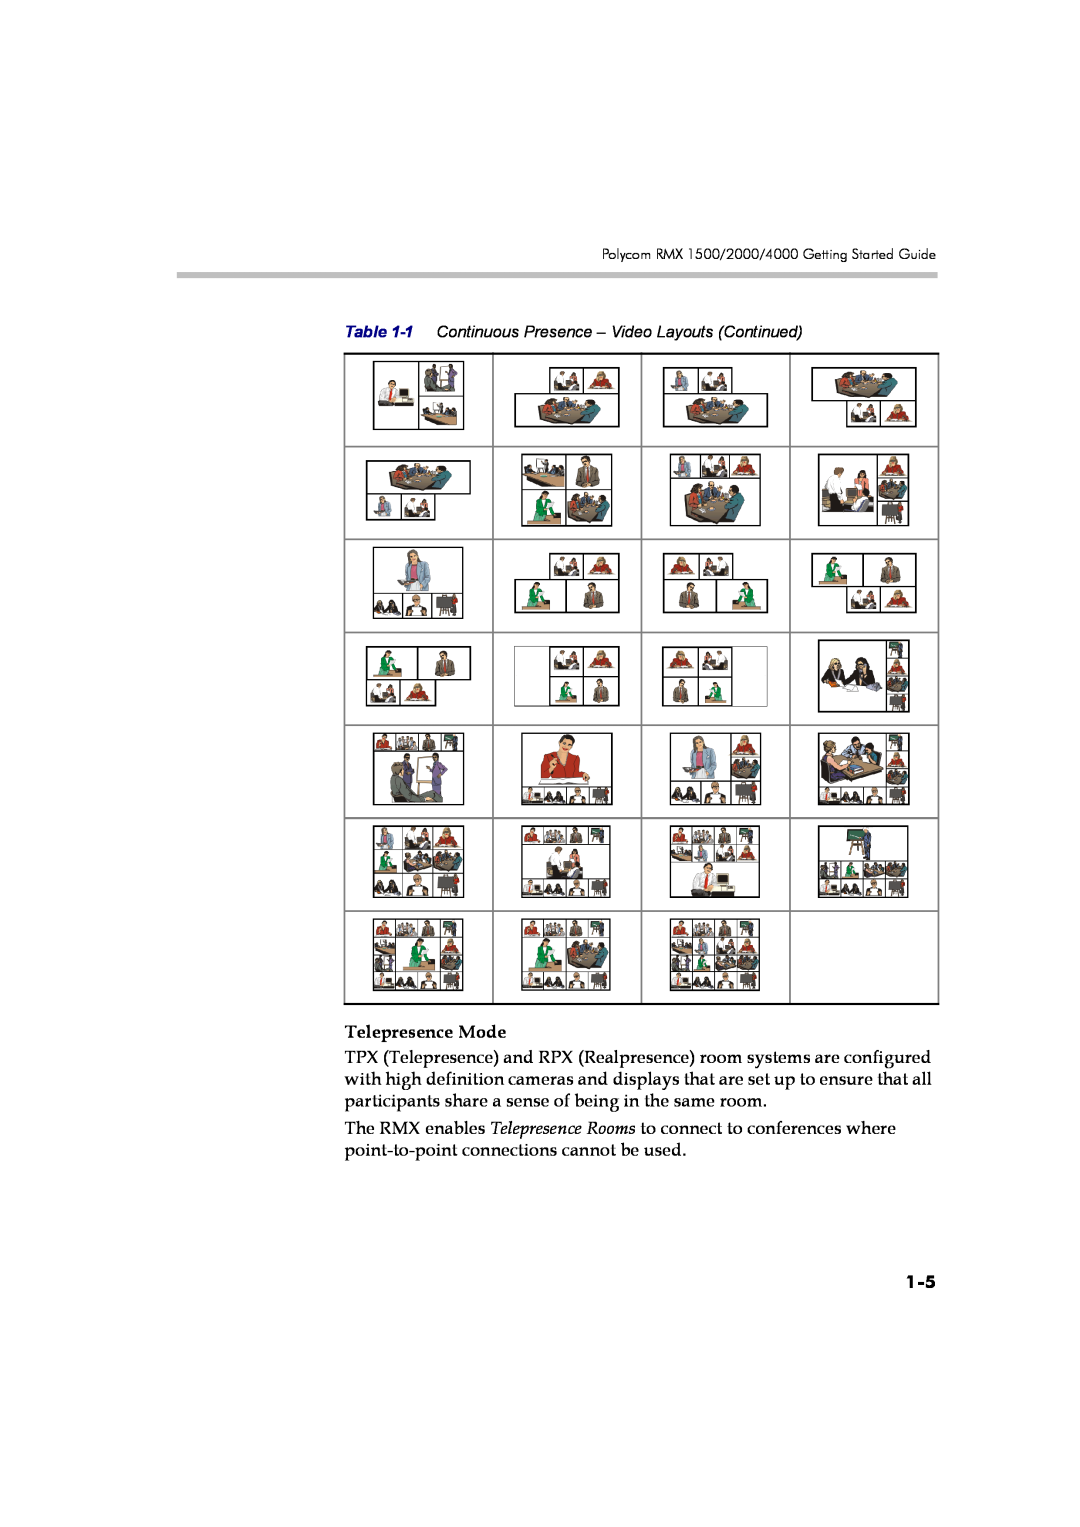 Polycom DOC2560B manual Telepresence Mode, 1 Continuous Presence - Video Layouts Continued 